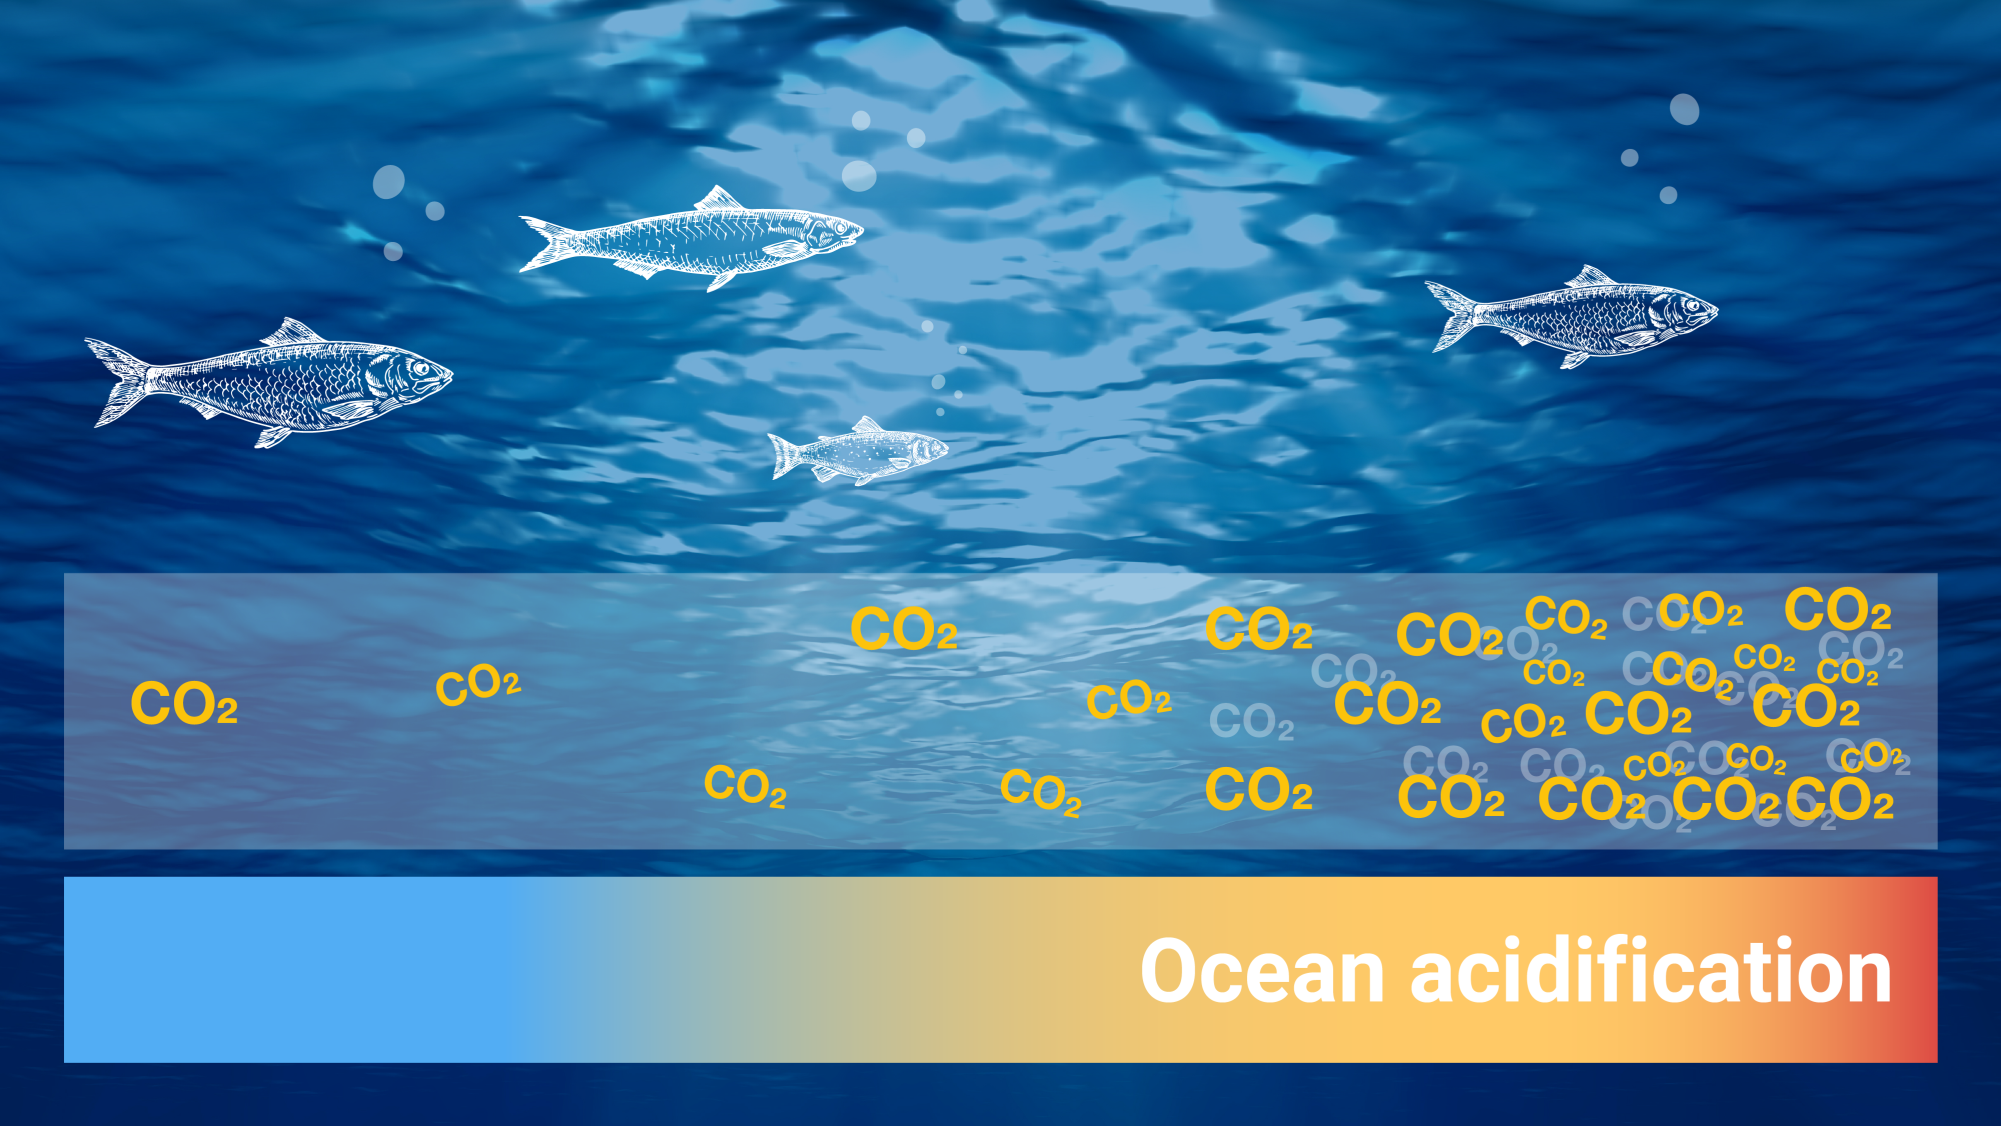 Incorporating Traditional Management Techniques to Combat Effects of Ocean Acidification